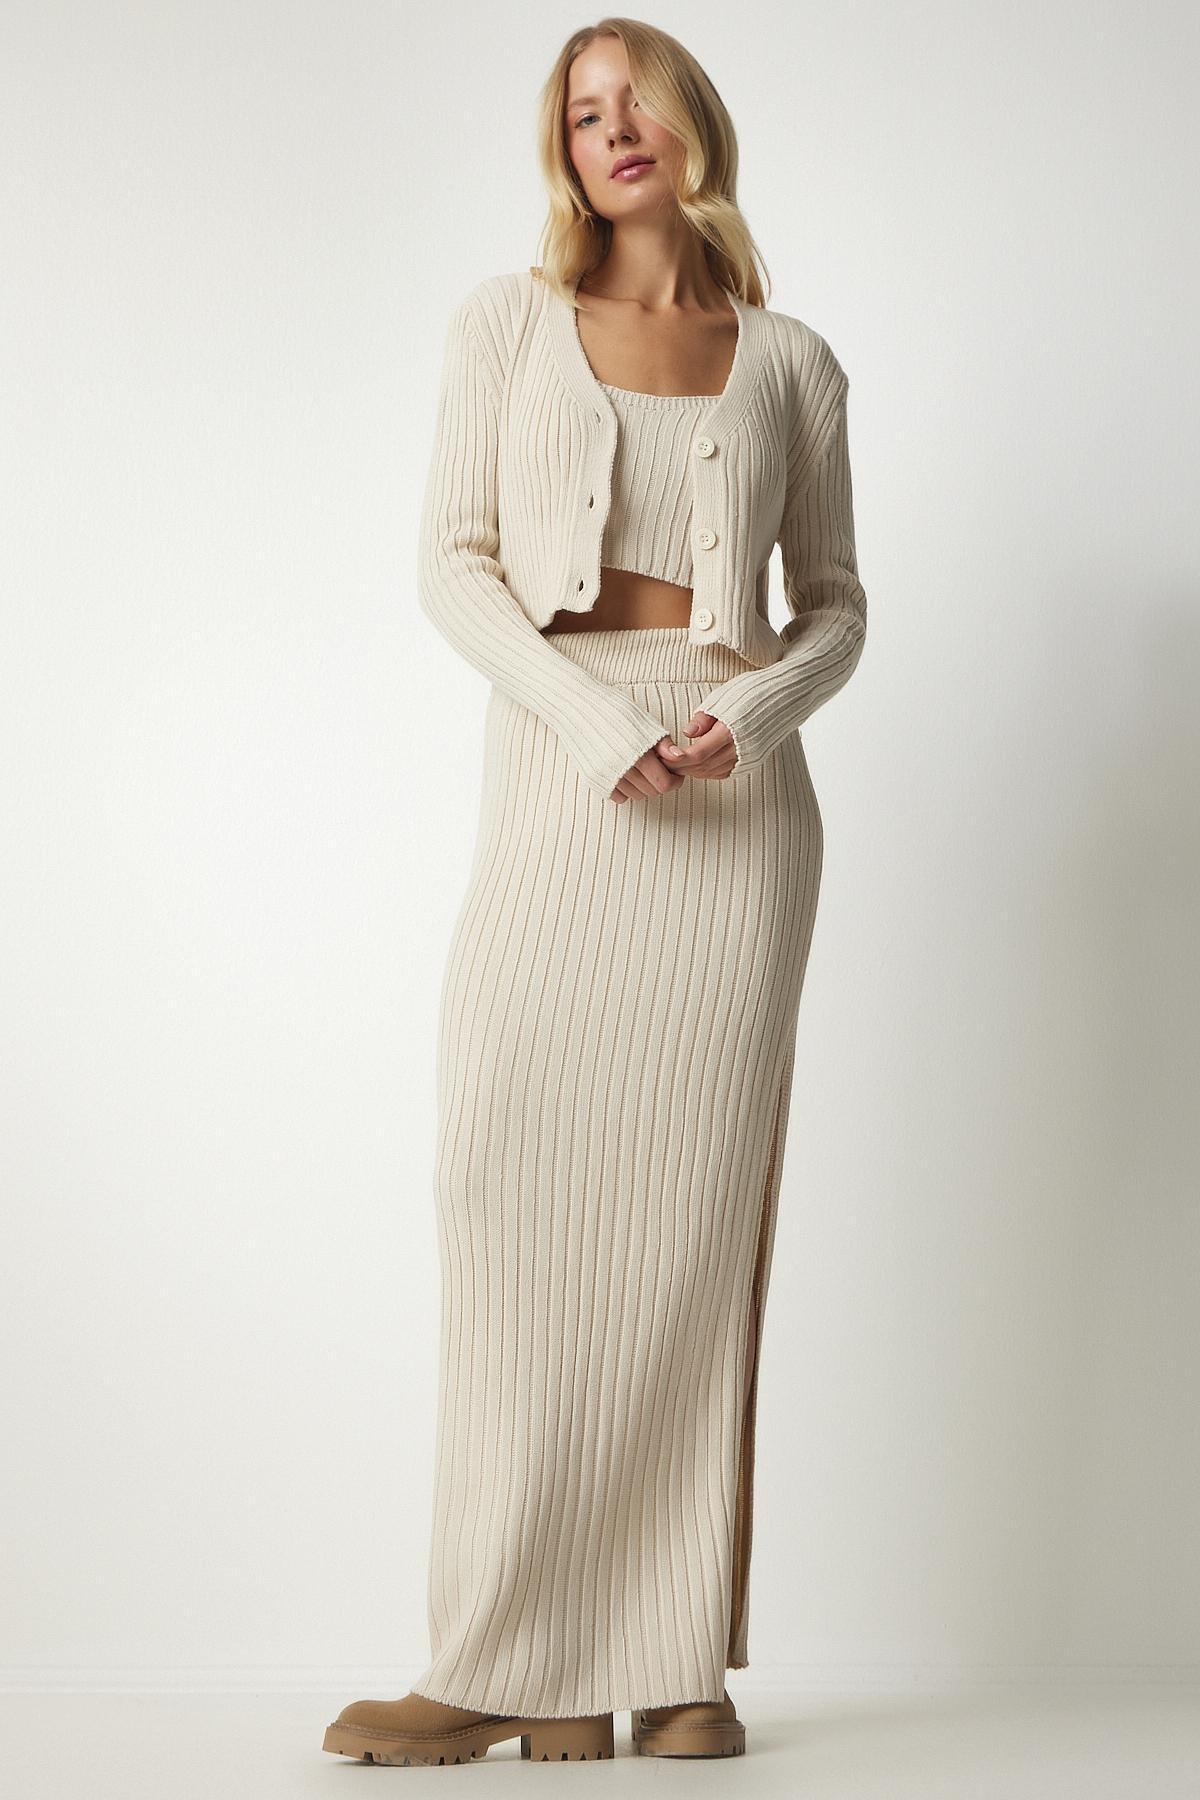 Happiness Istanbul - Cream Cardigan Athlete Skirt Knitwear Co-Ord Set